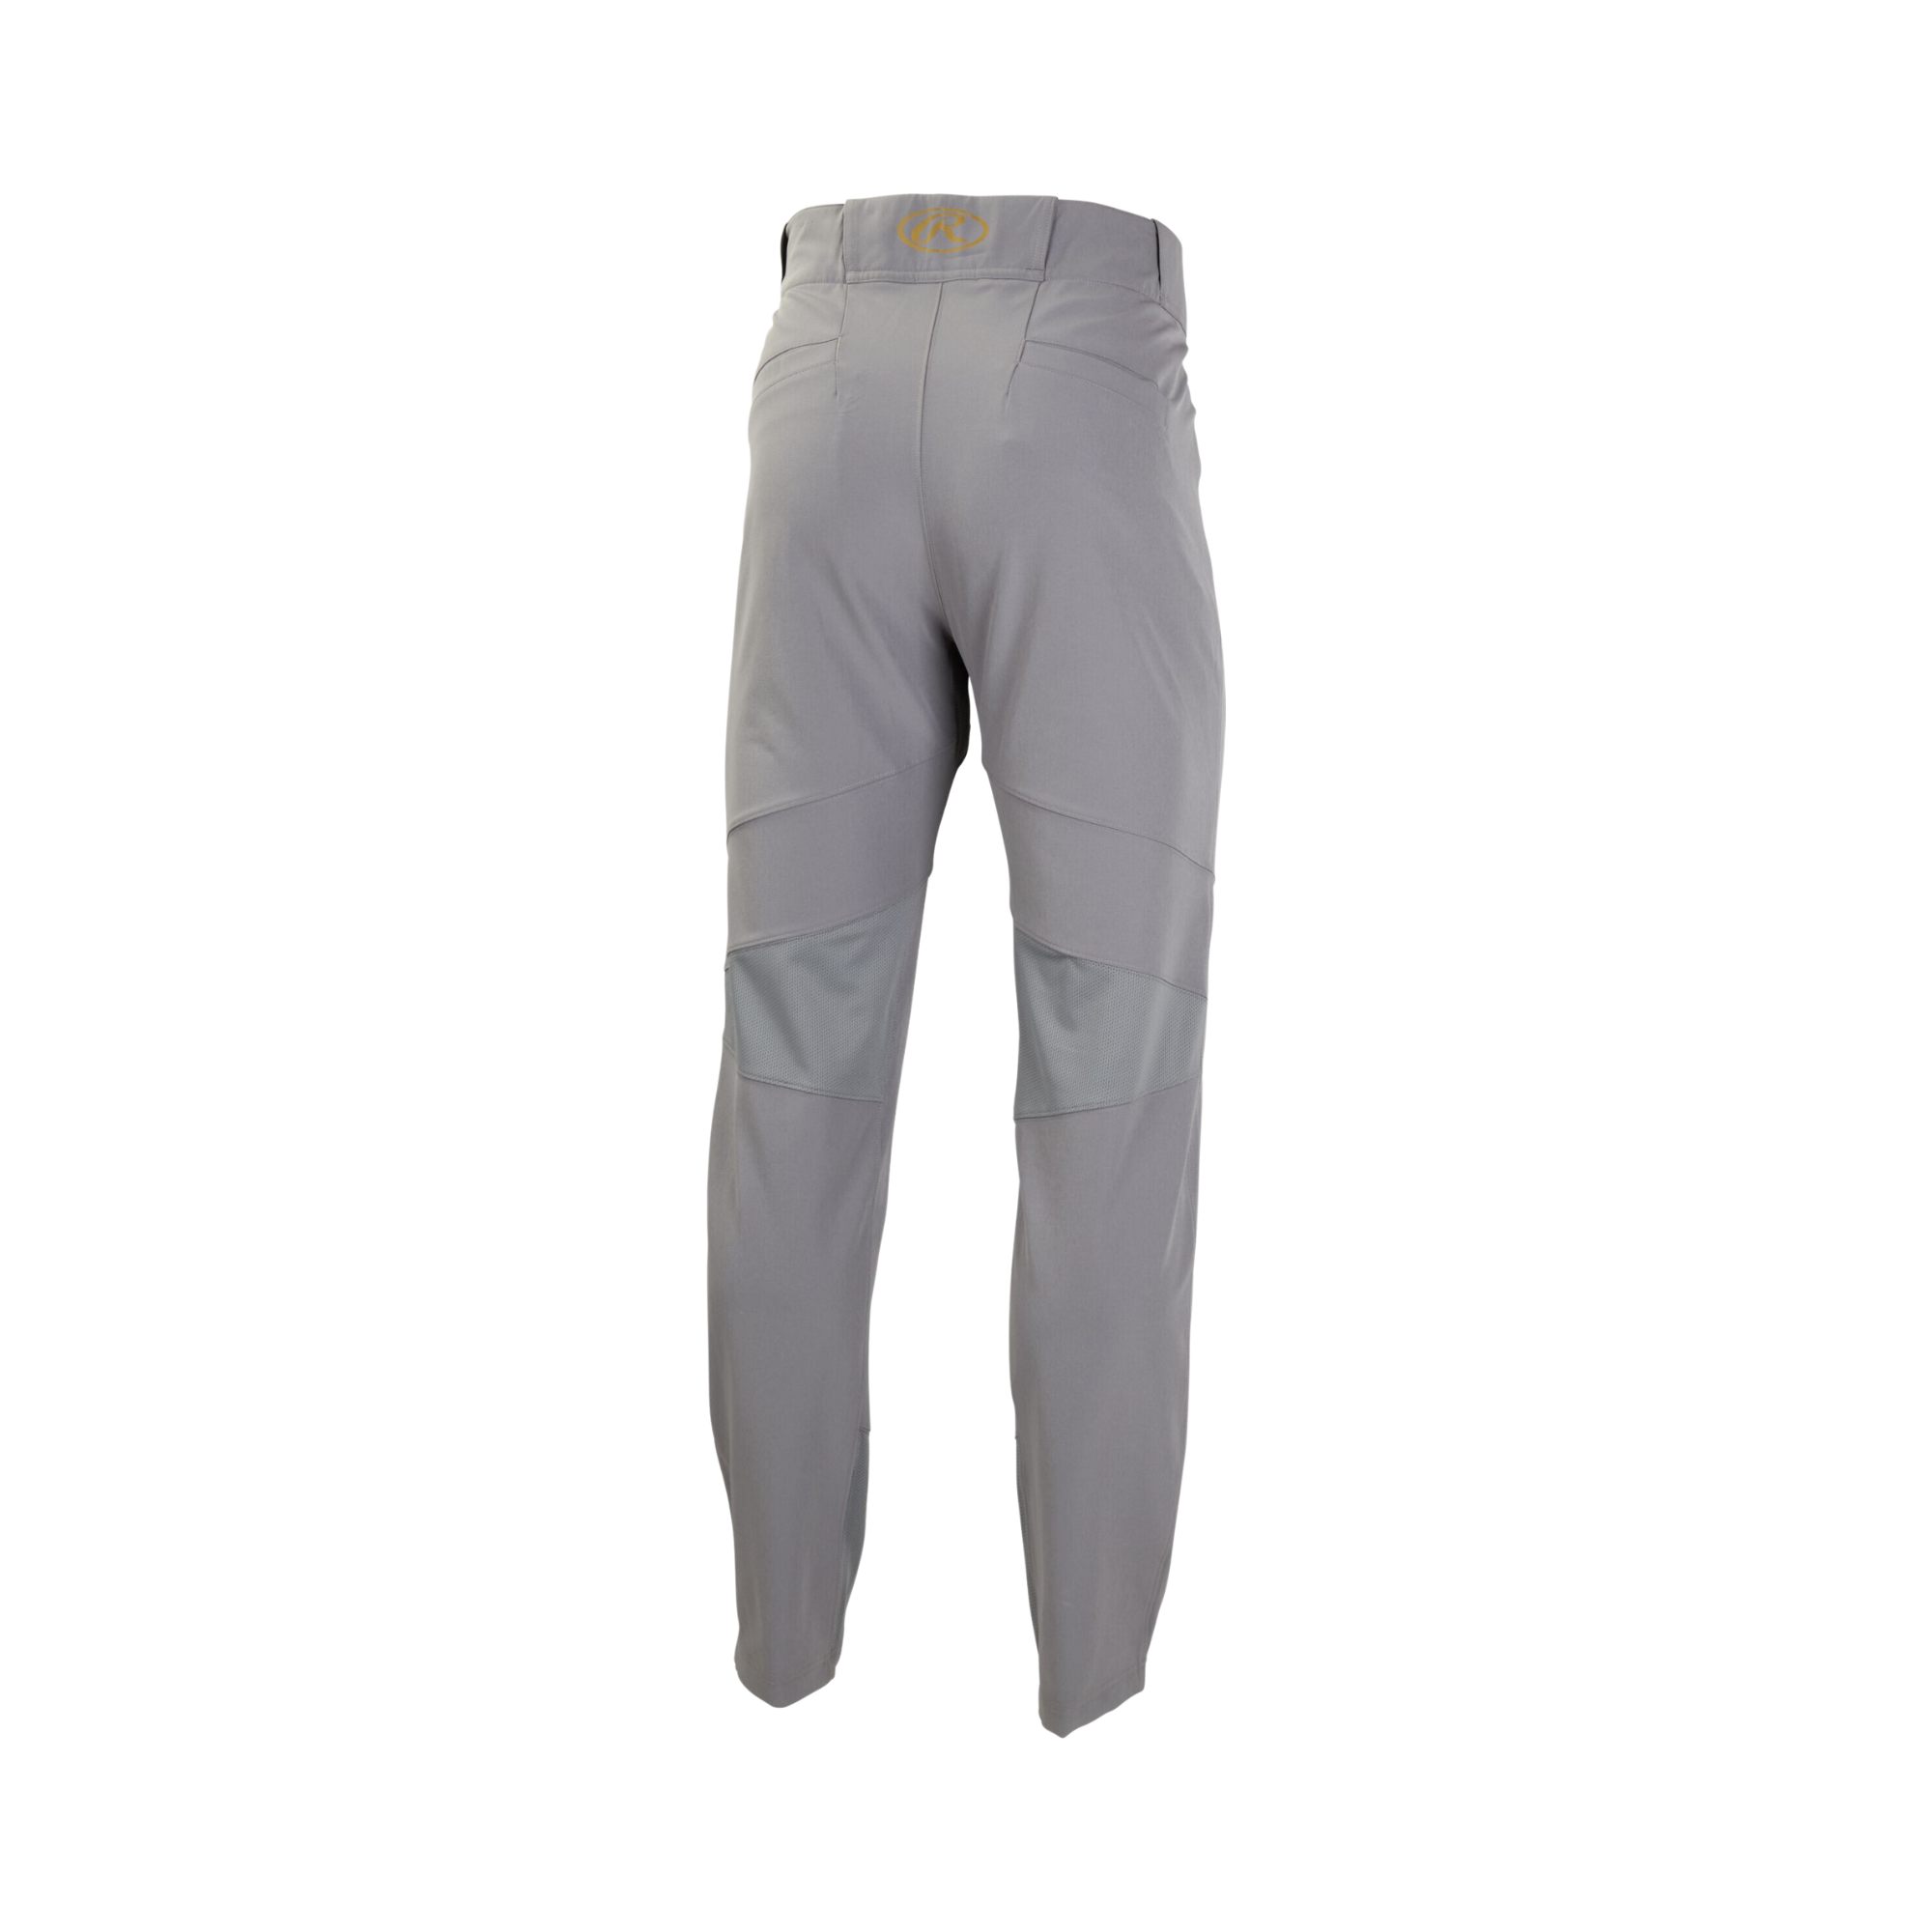 Rawlings Gold Collection Athletic Fit Performance Baseball Pants Blue Gray